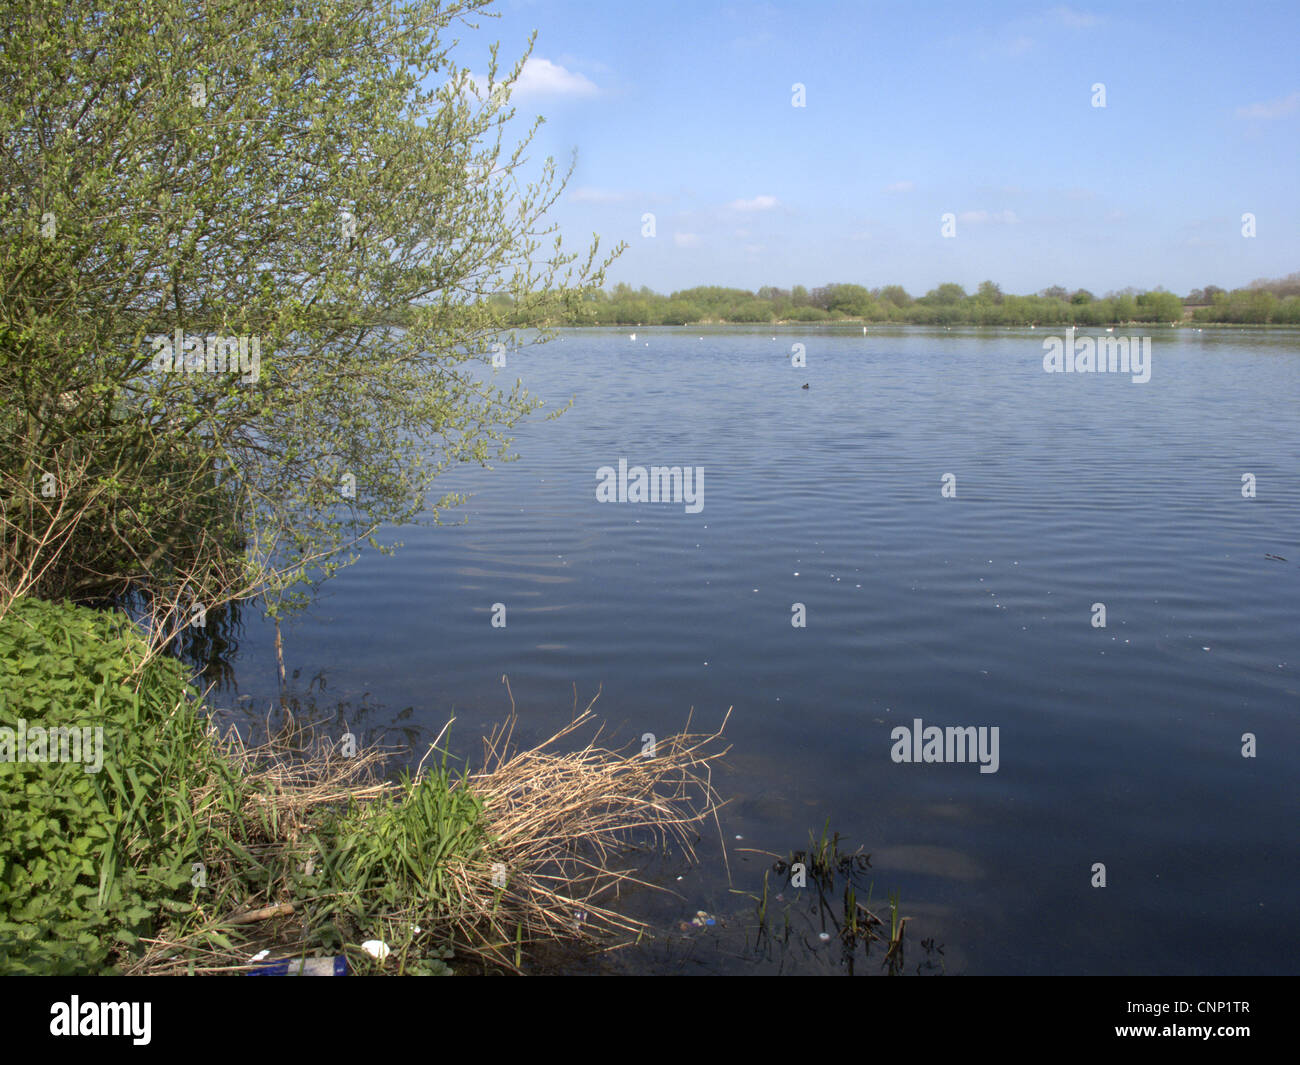 Disused flooded gravel pit habitat, Coton Pools, Tame Valley ...